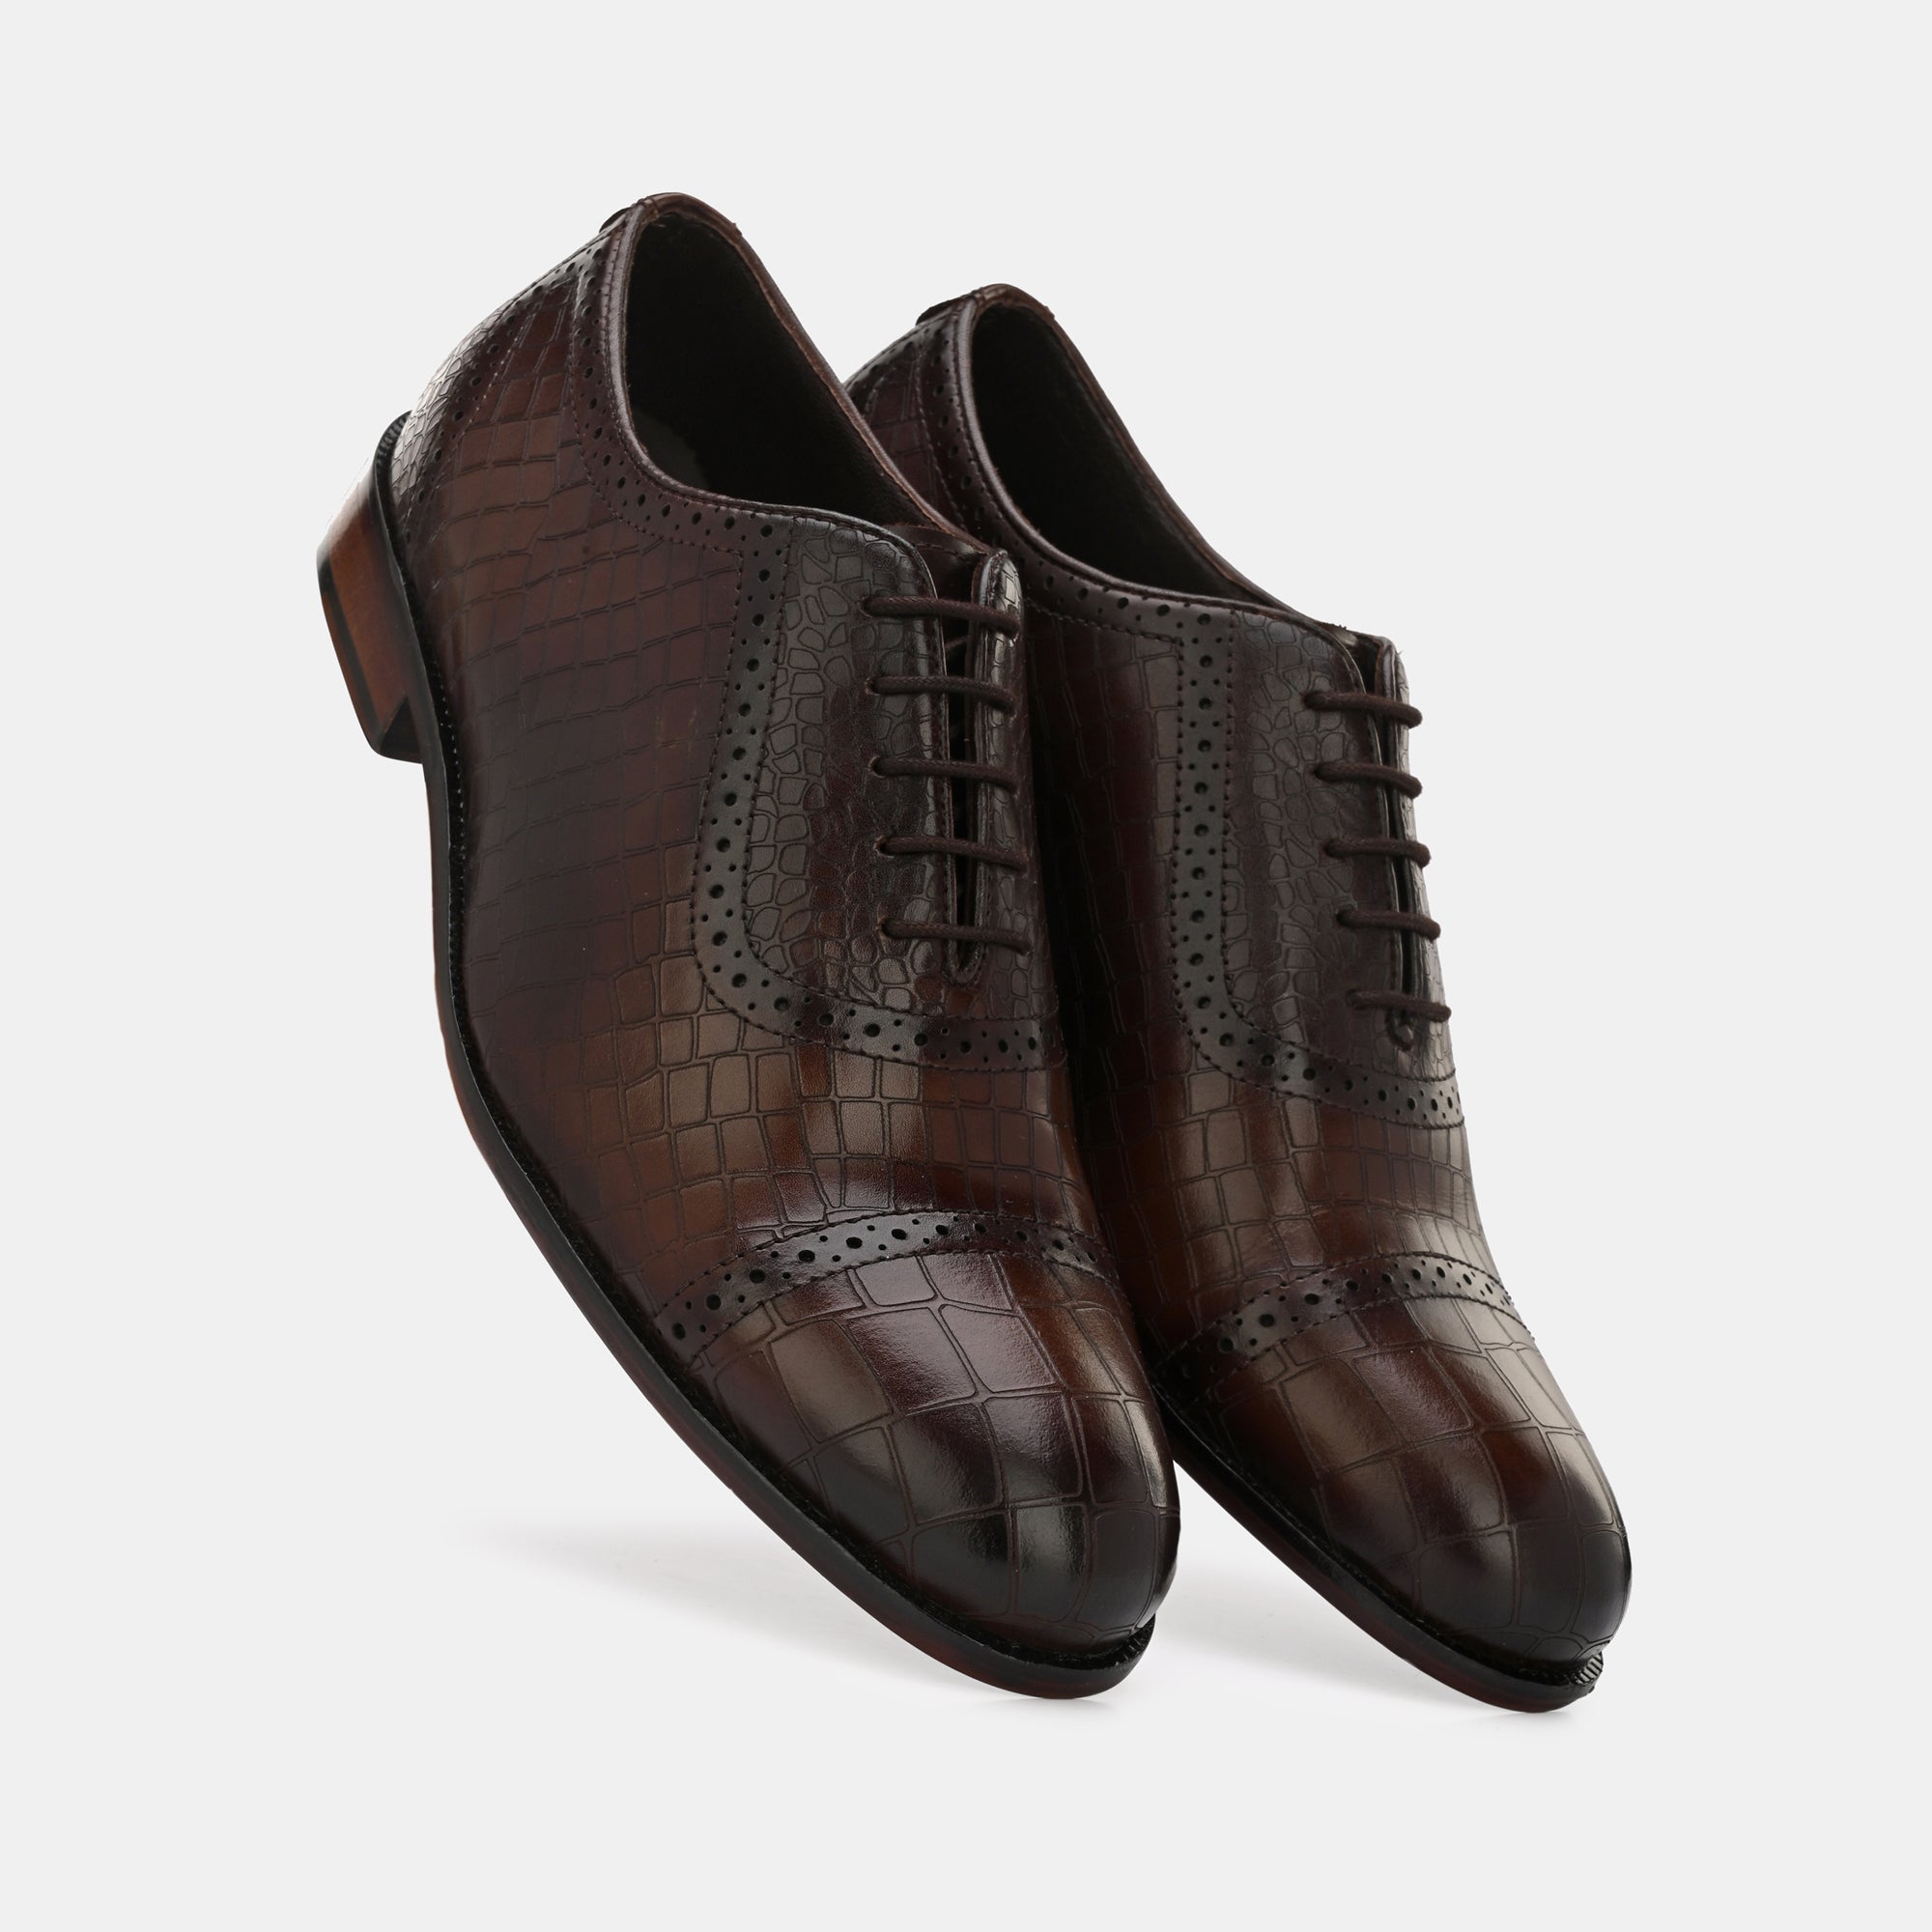 Brown Laser Engraved Semi-Brogues by Lafattio